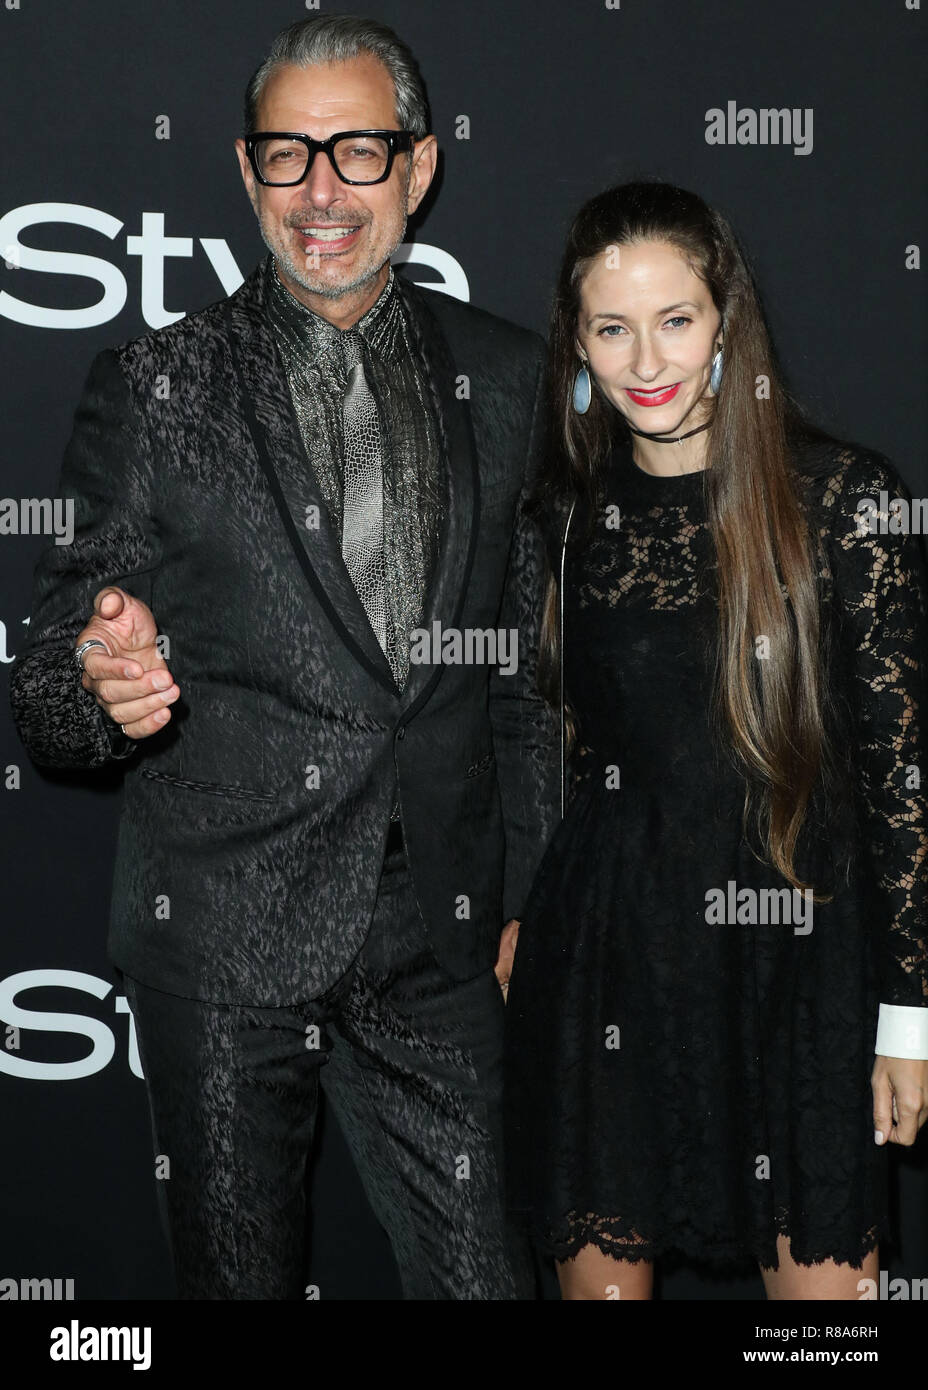 LOS ANGELES, CA, USA - OCTOBER 22: Jeff Goldblum, Emilie Livingston at the InStyle Awards 2018 held at the Getty Center on October 22, 2018 in Los Angeles, California, United States. (Photo by Xavier Collin/Image Press Agency) Stock Photo